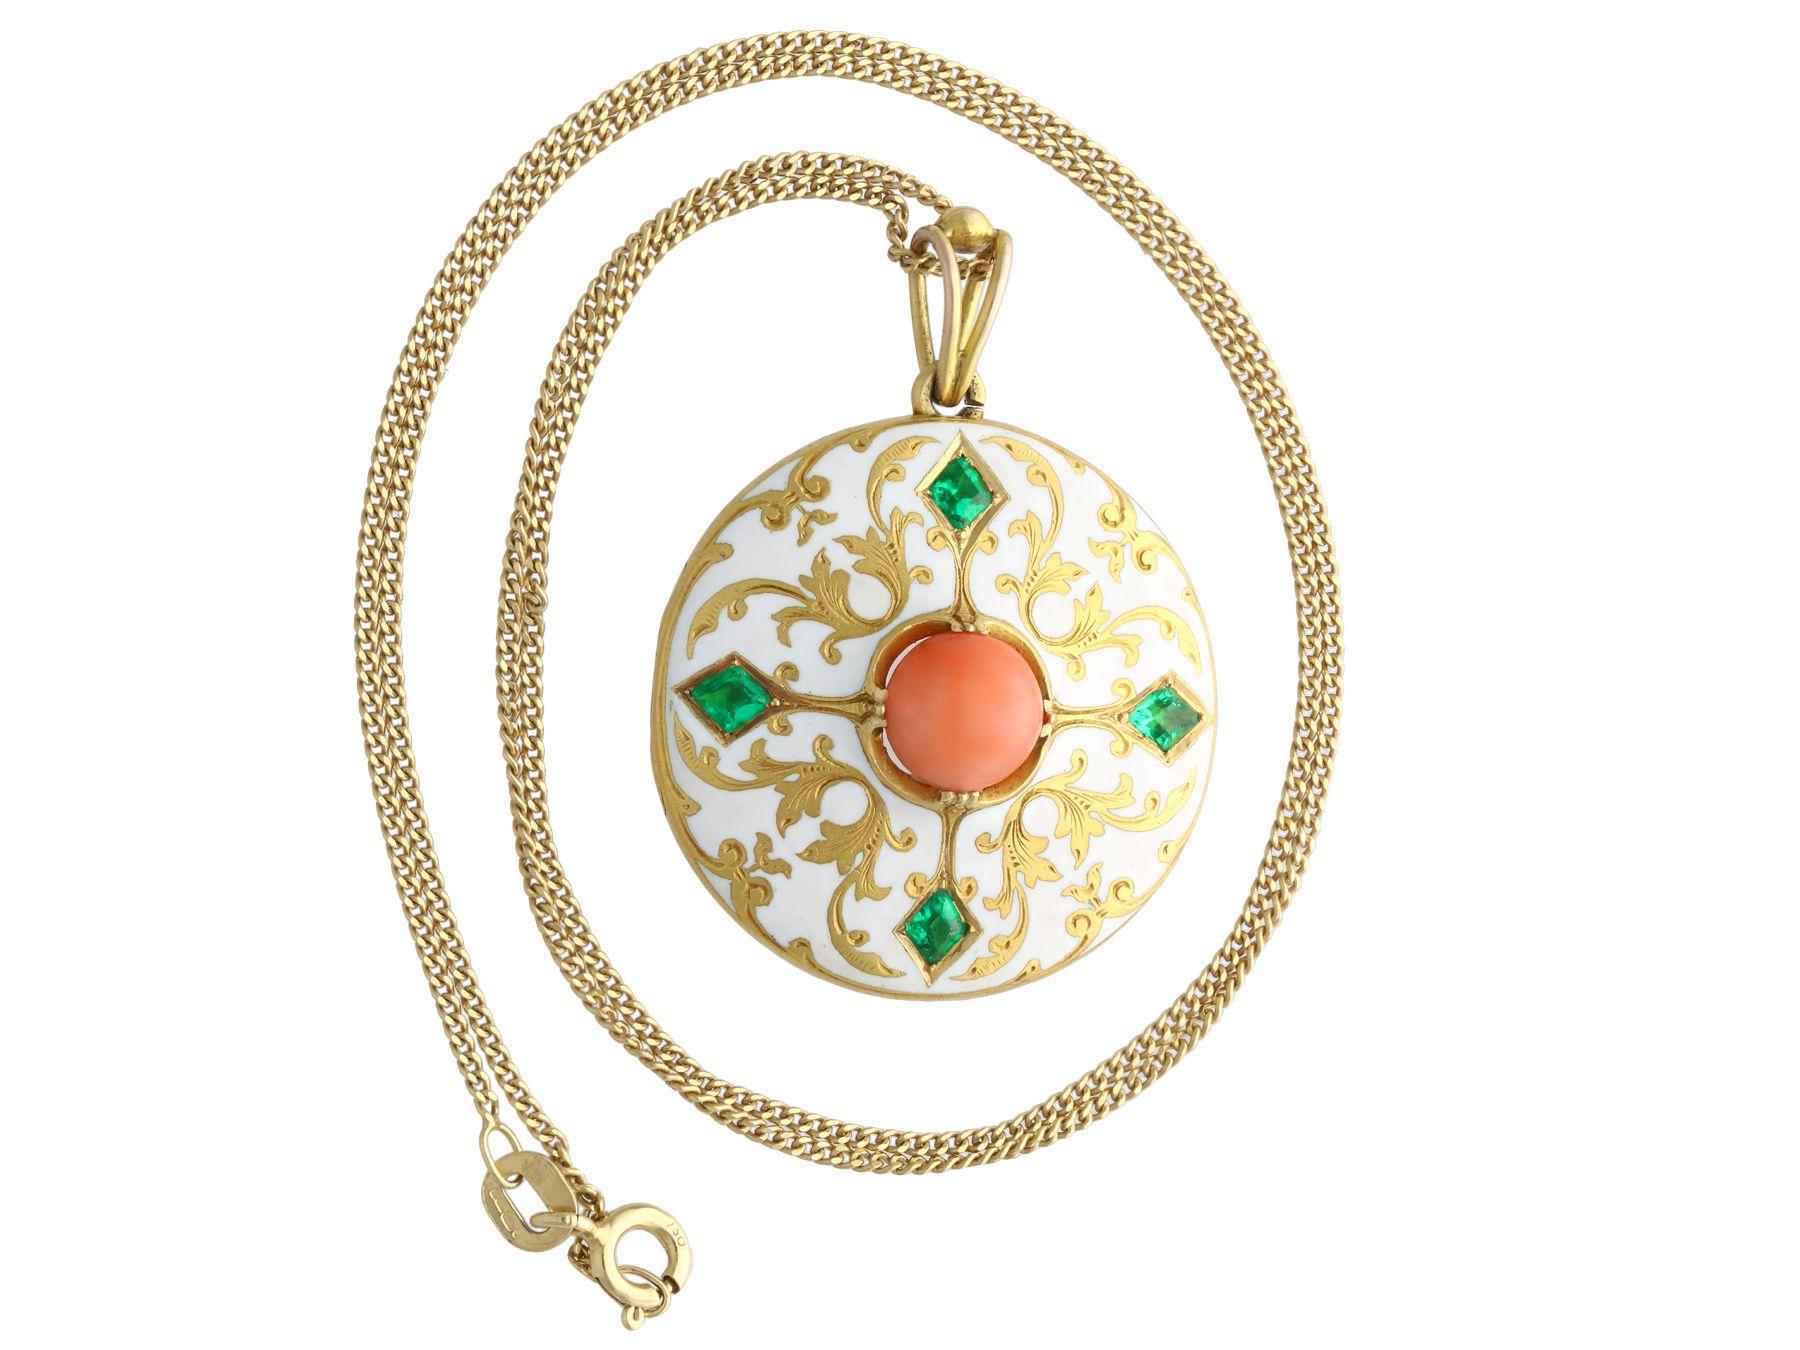 A stunning, fine and impressive Victorian 0.55 carat emerald, coral and enamel, 18 karat yellow gold locket pendant; part of our diverse antique jewelry collections

This stunning, fine and impressive antique locket pendant has been crafted in 18k